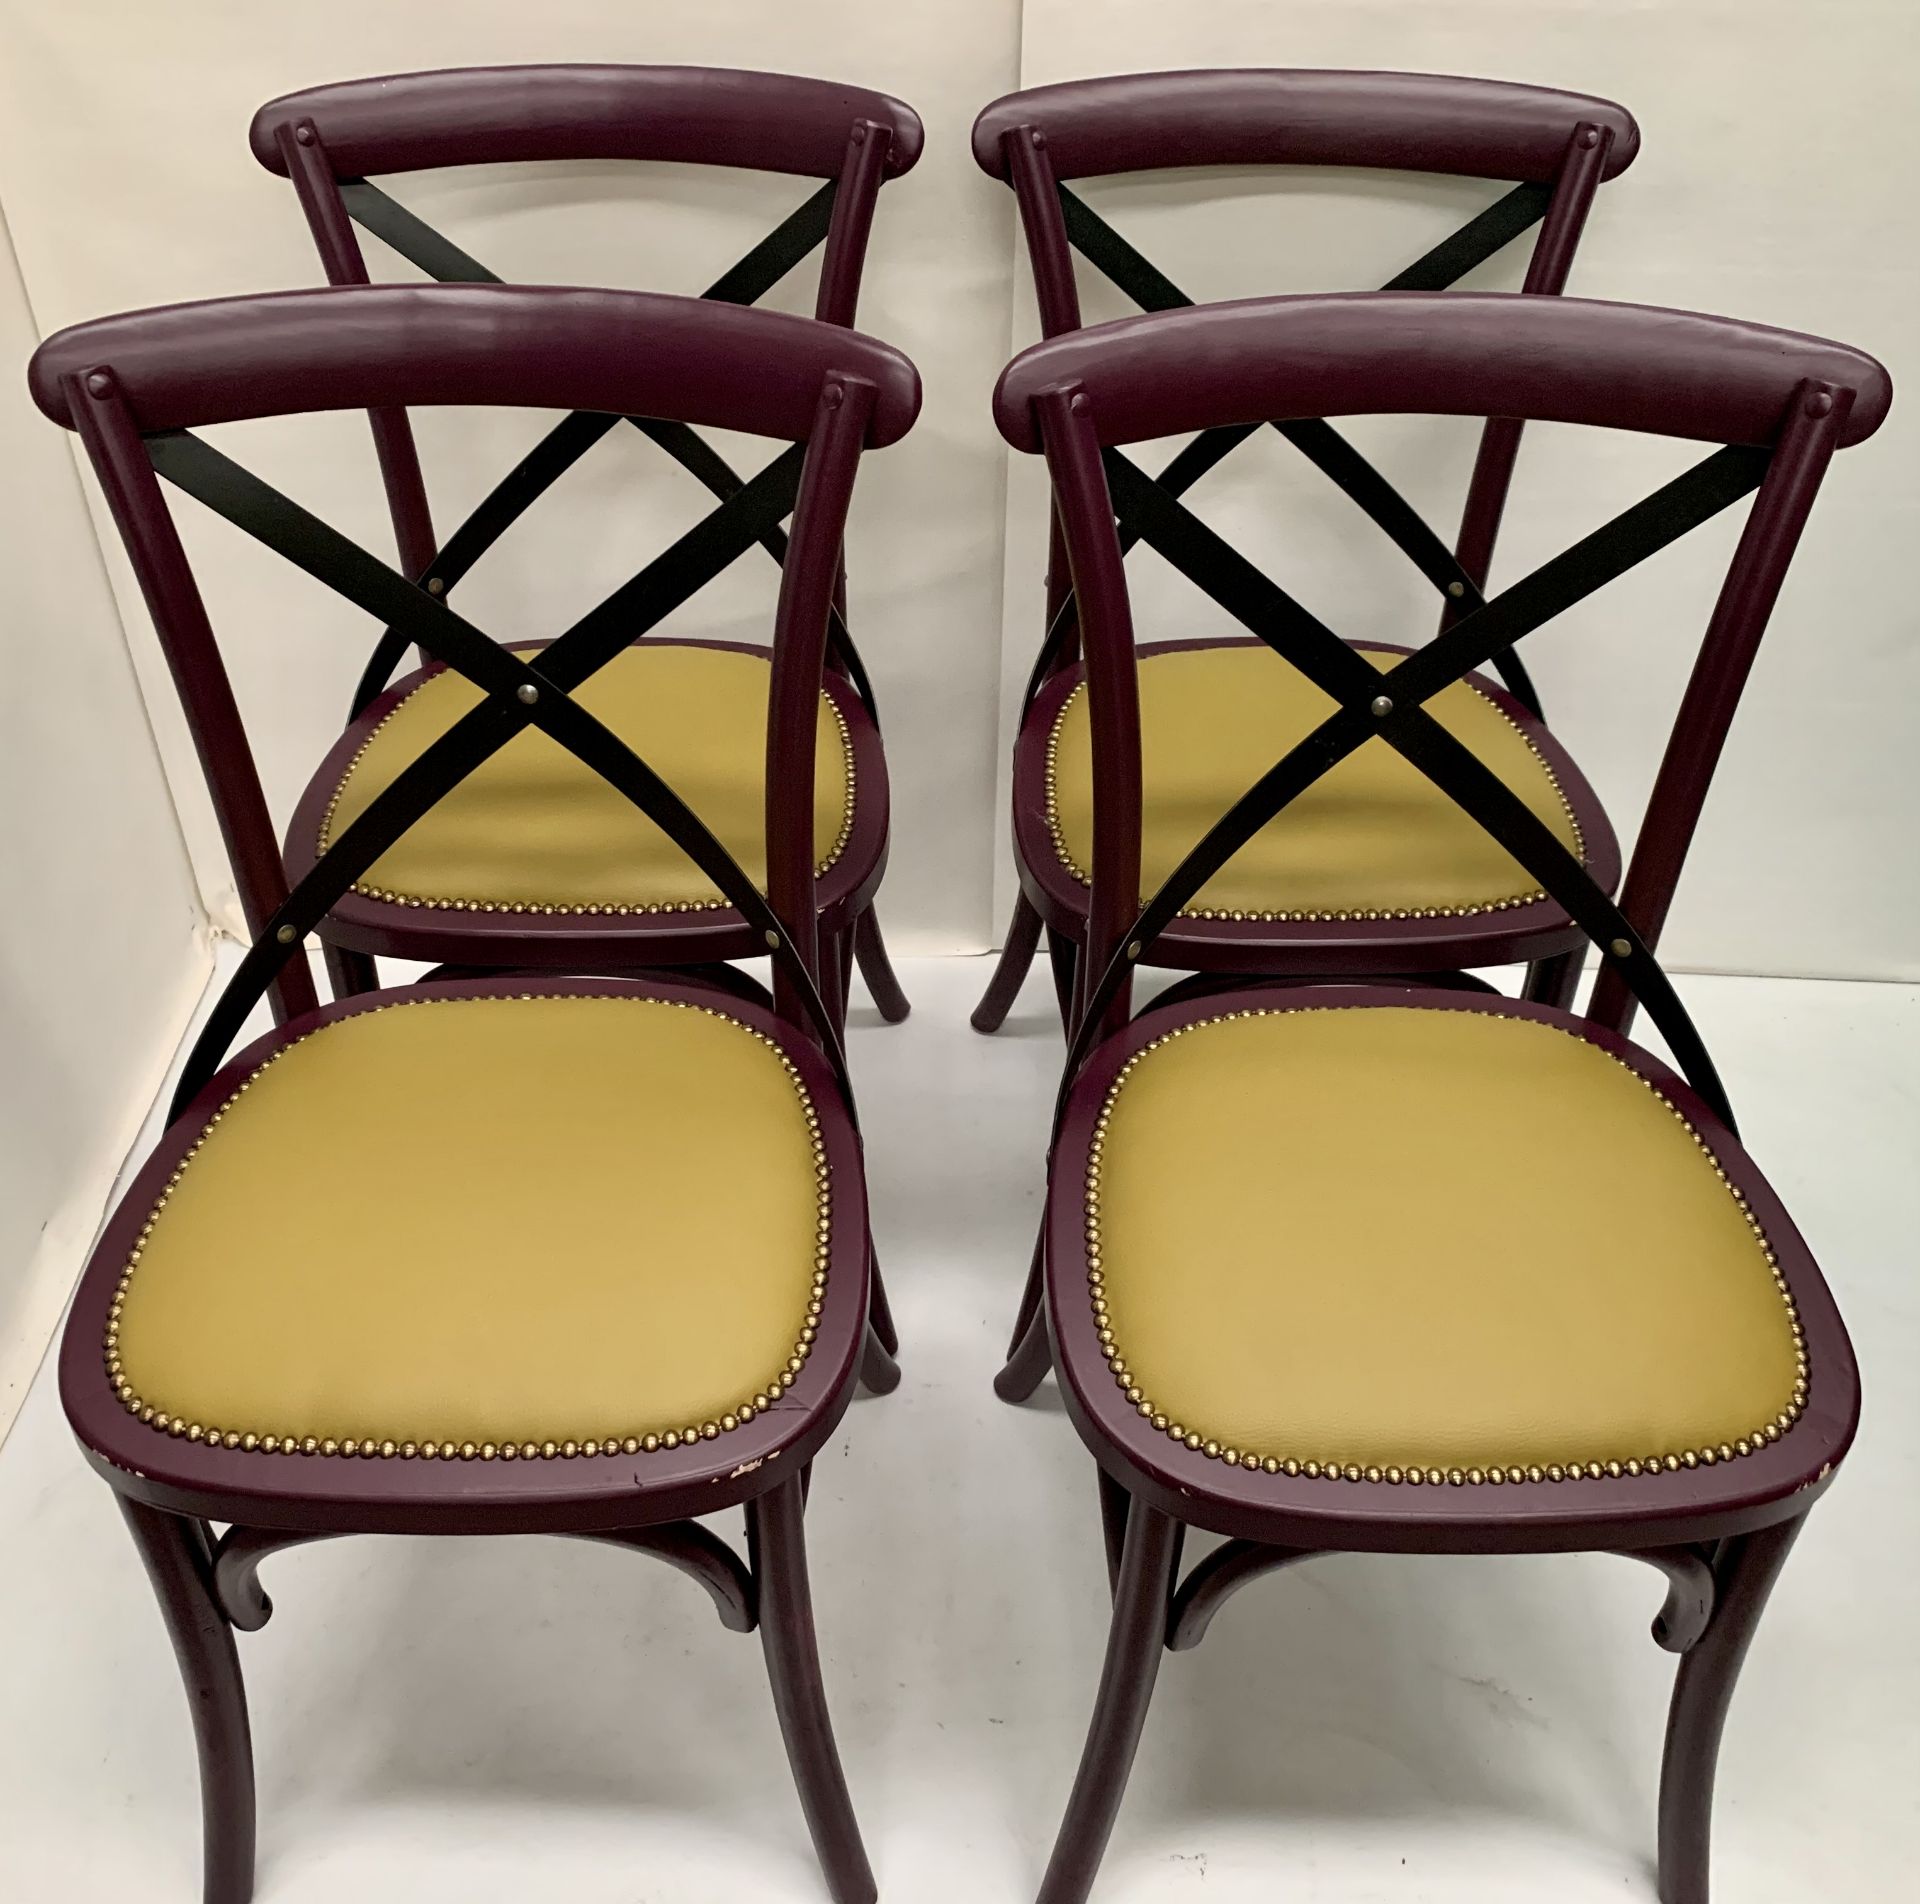 4 x Palm dark purple wooden dining chairs with raw coloured leather effect seats - 51cm x 55cm x